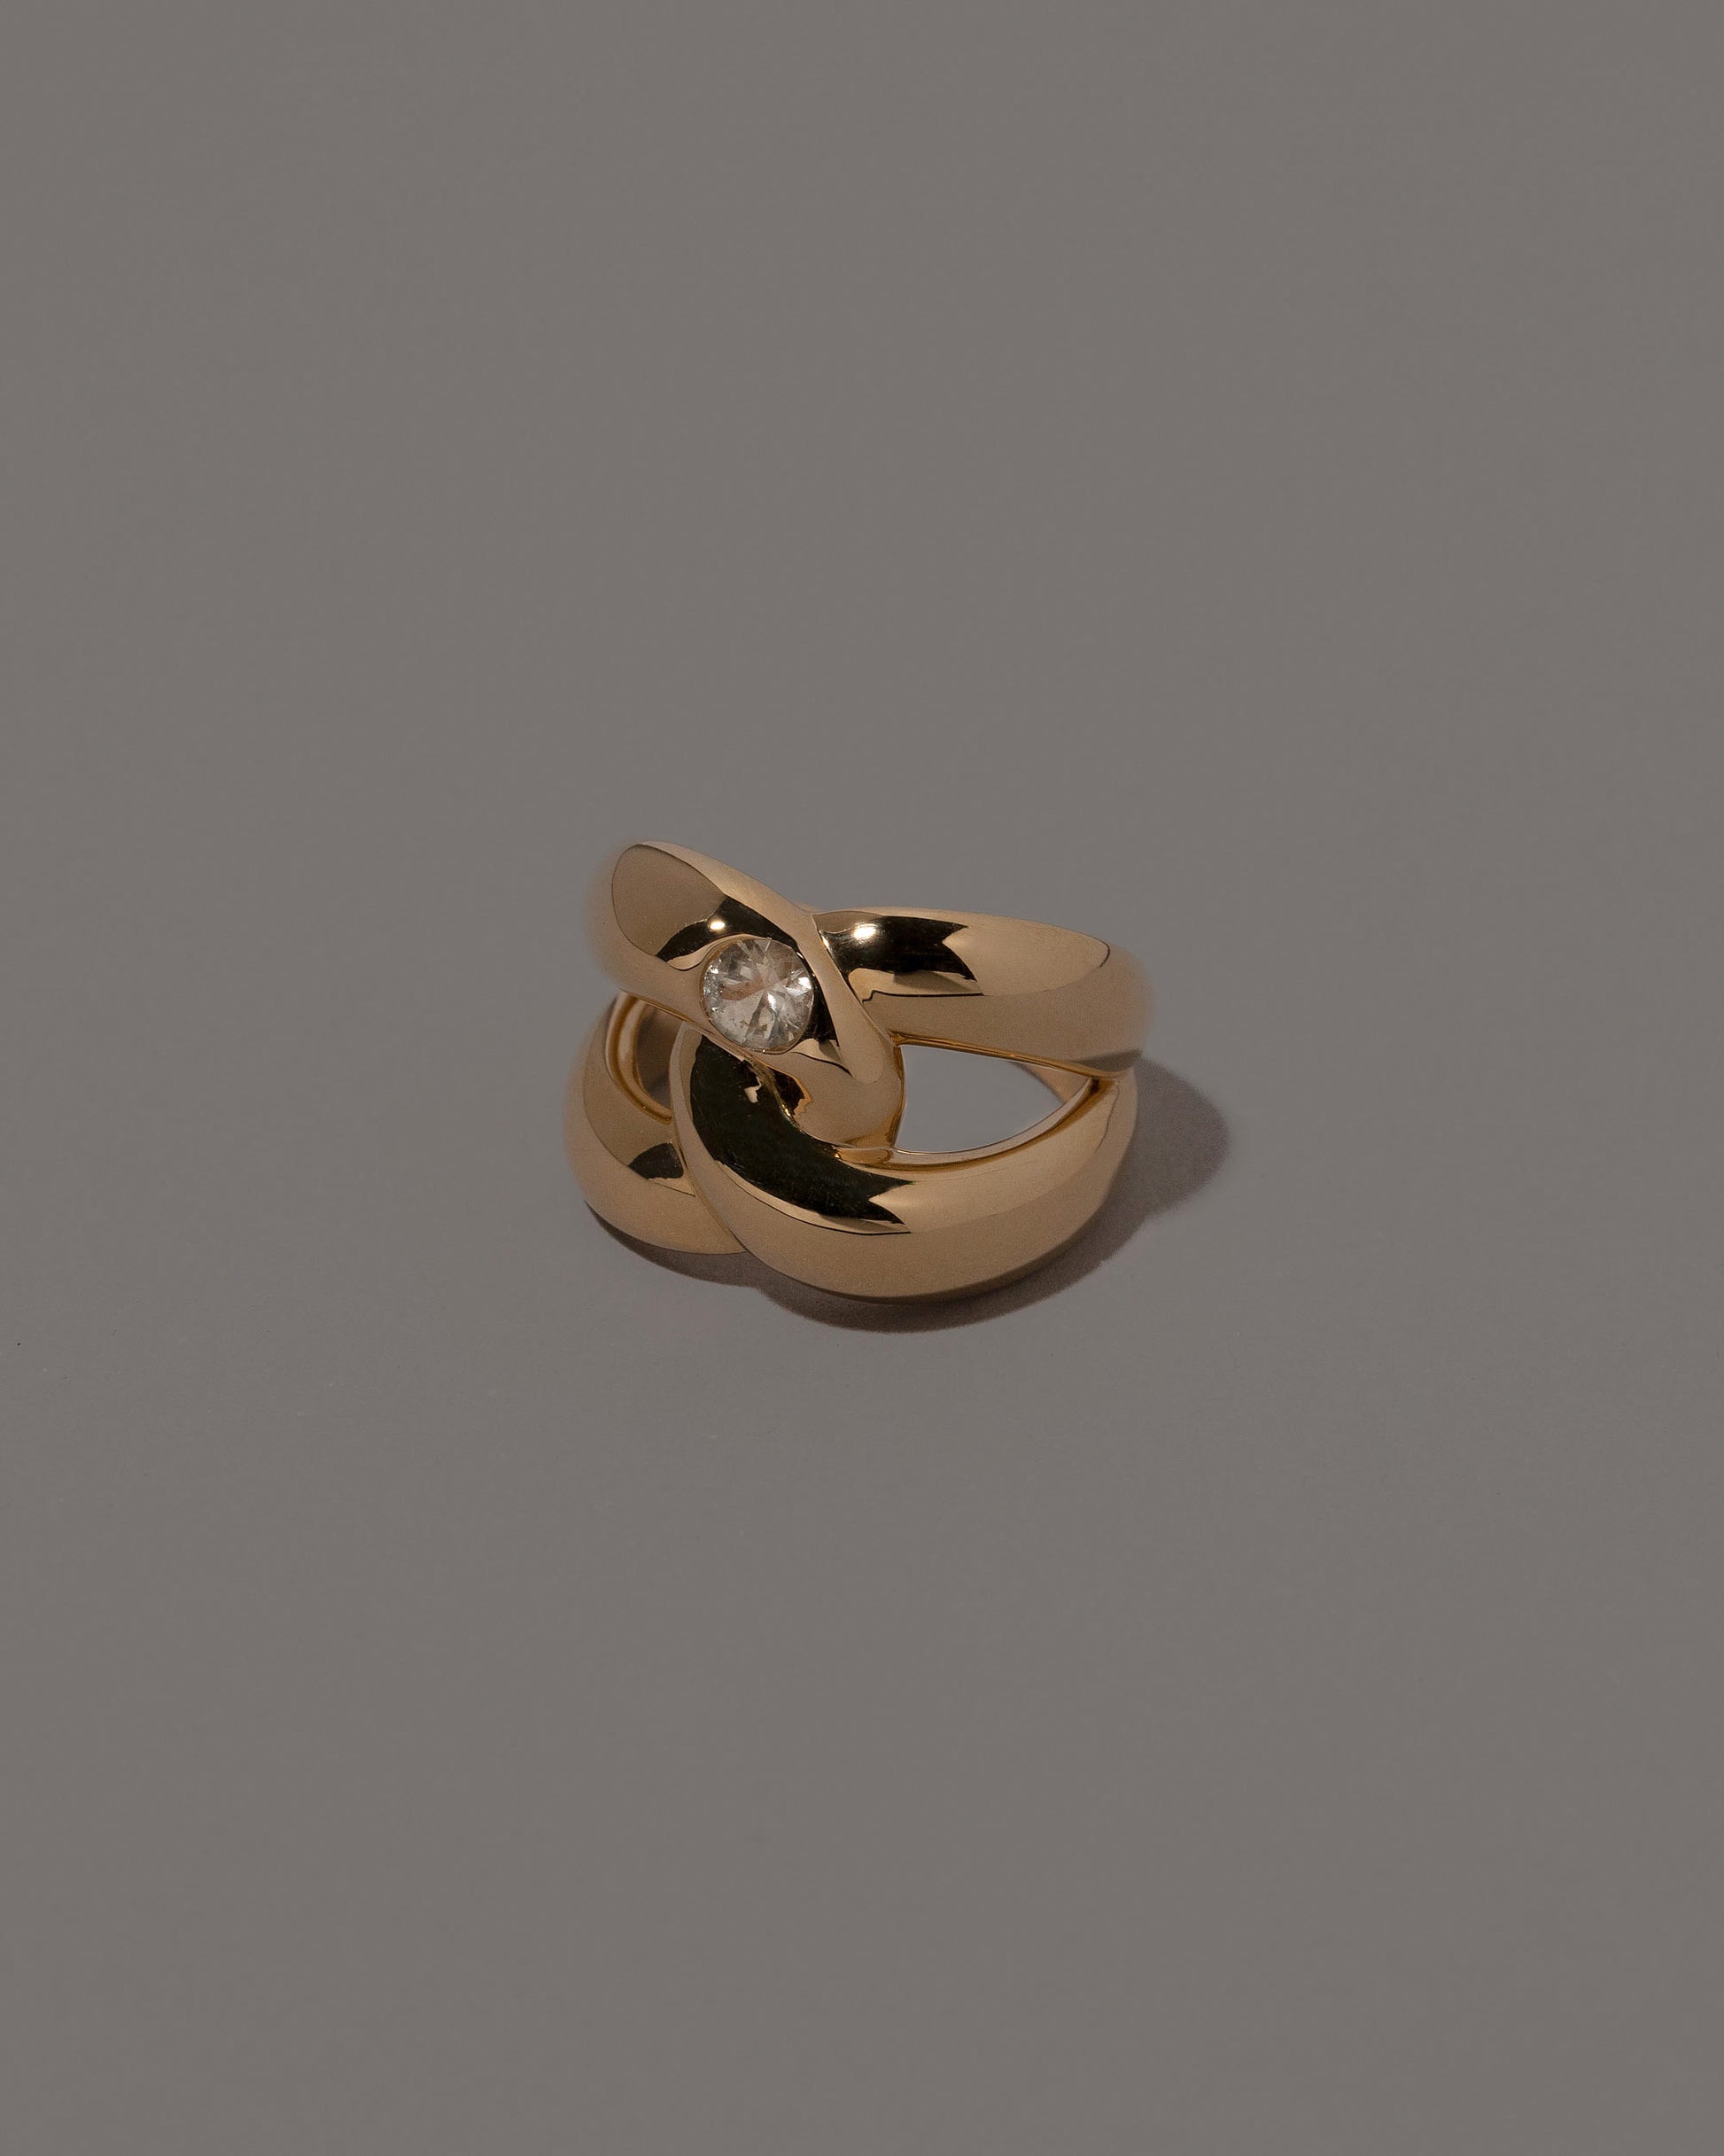 View from the side of the One Ring on grey color background.